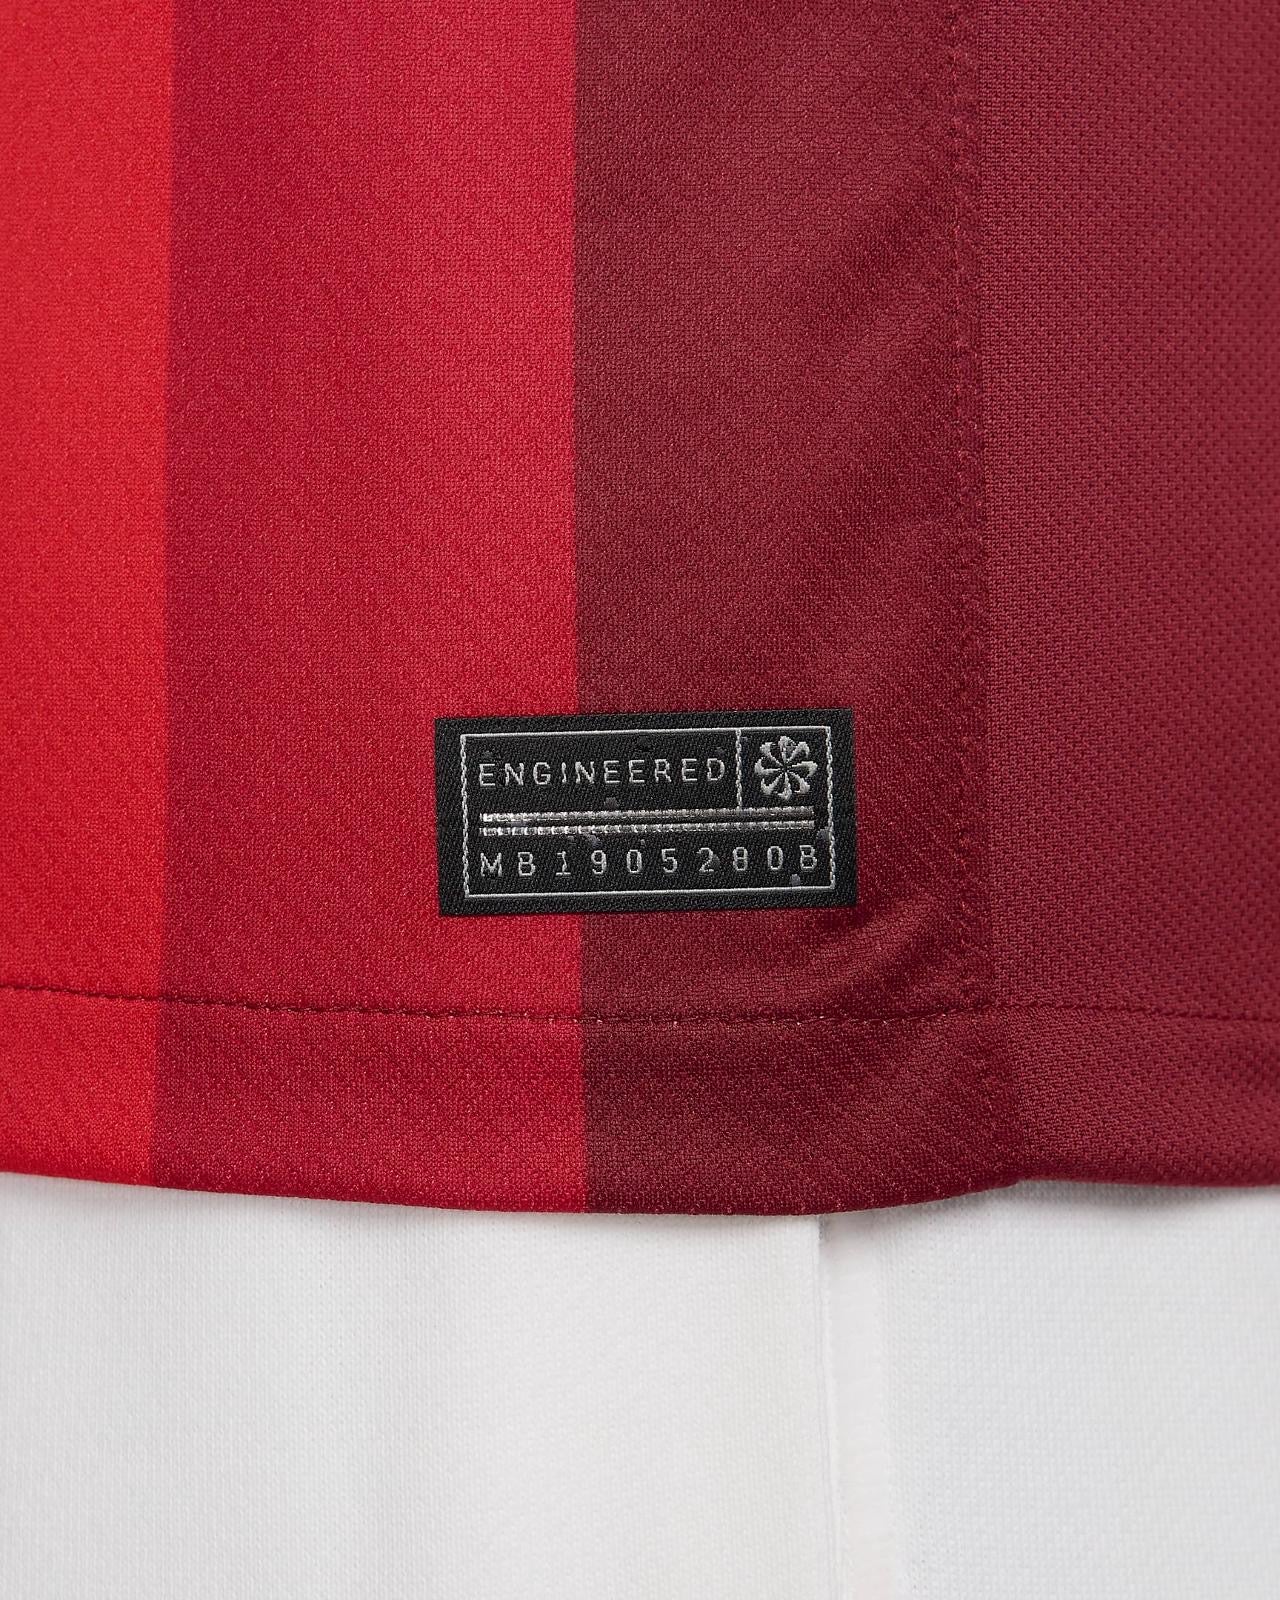 Norway 2024 Home Jersey